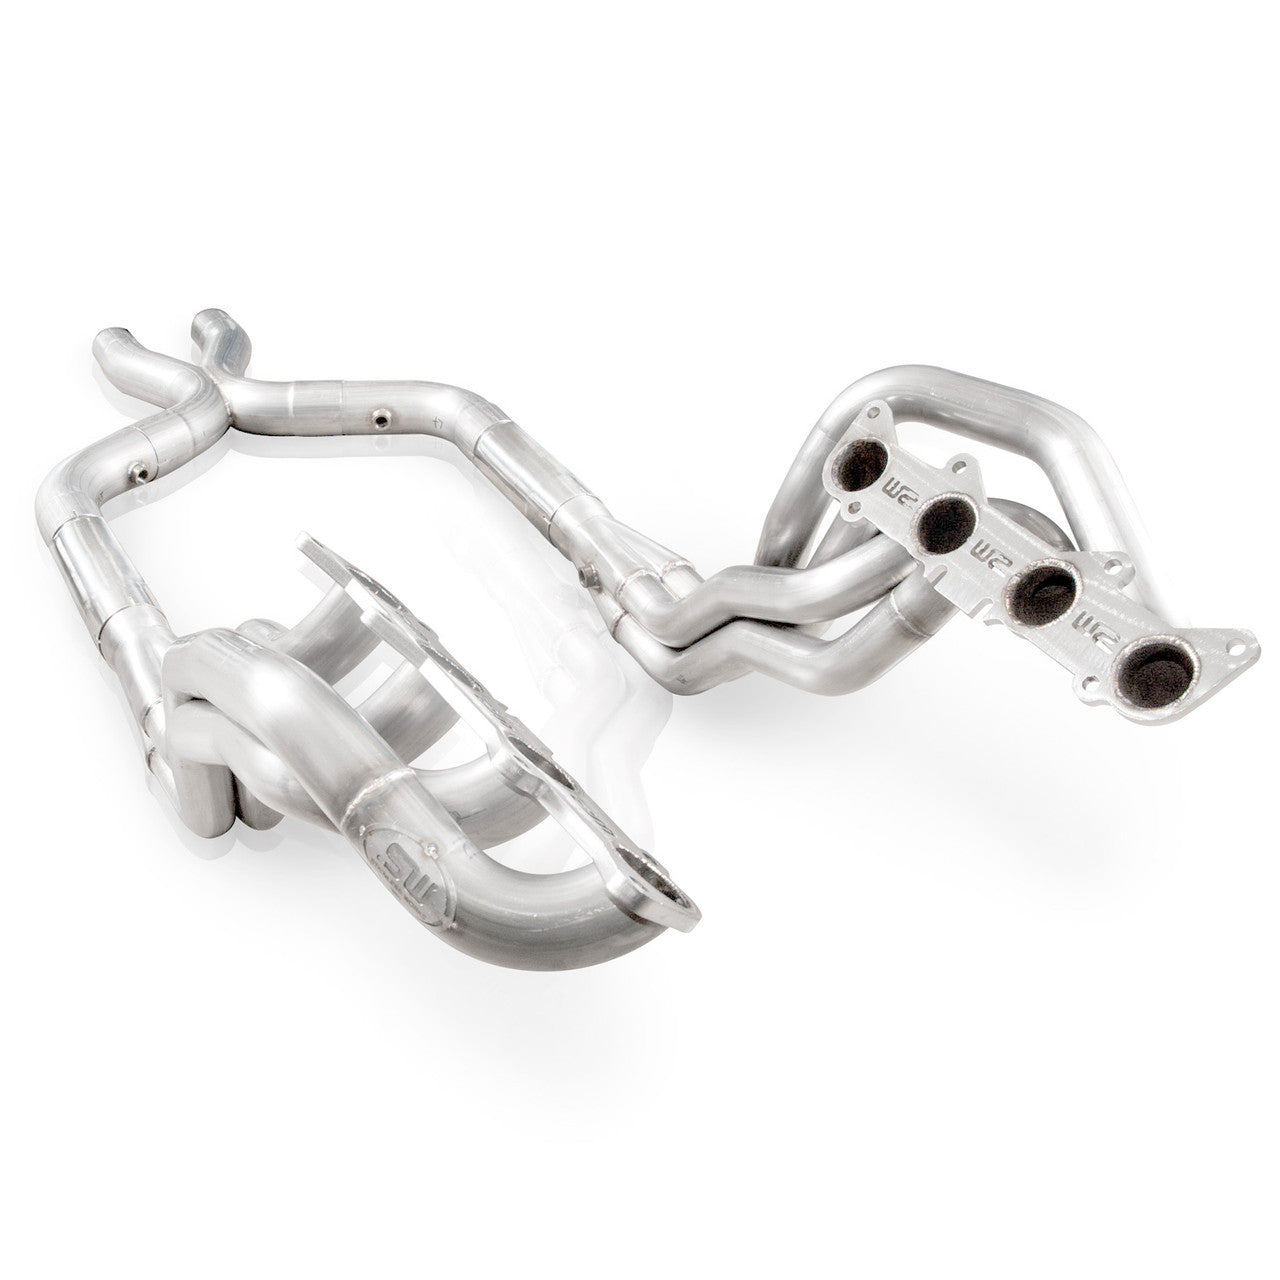 Stainless Power Headers 1-7/8" With Catted Leads Performance Connect - SSTubes